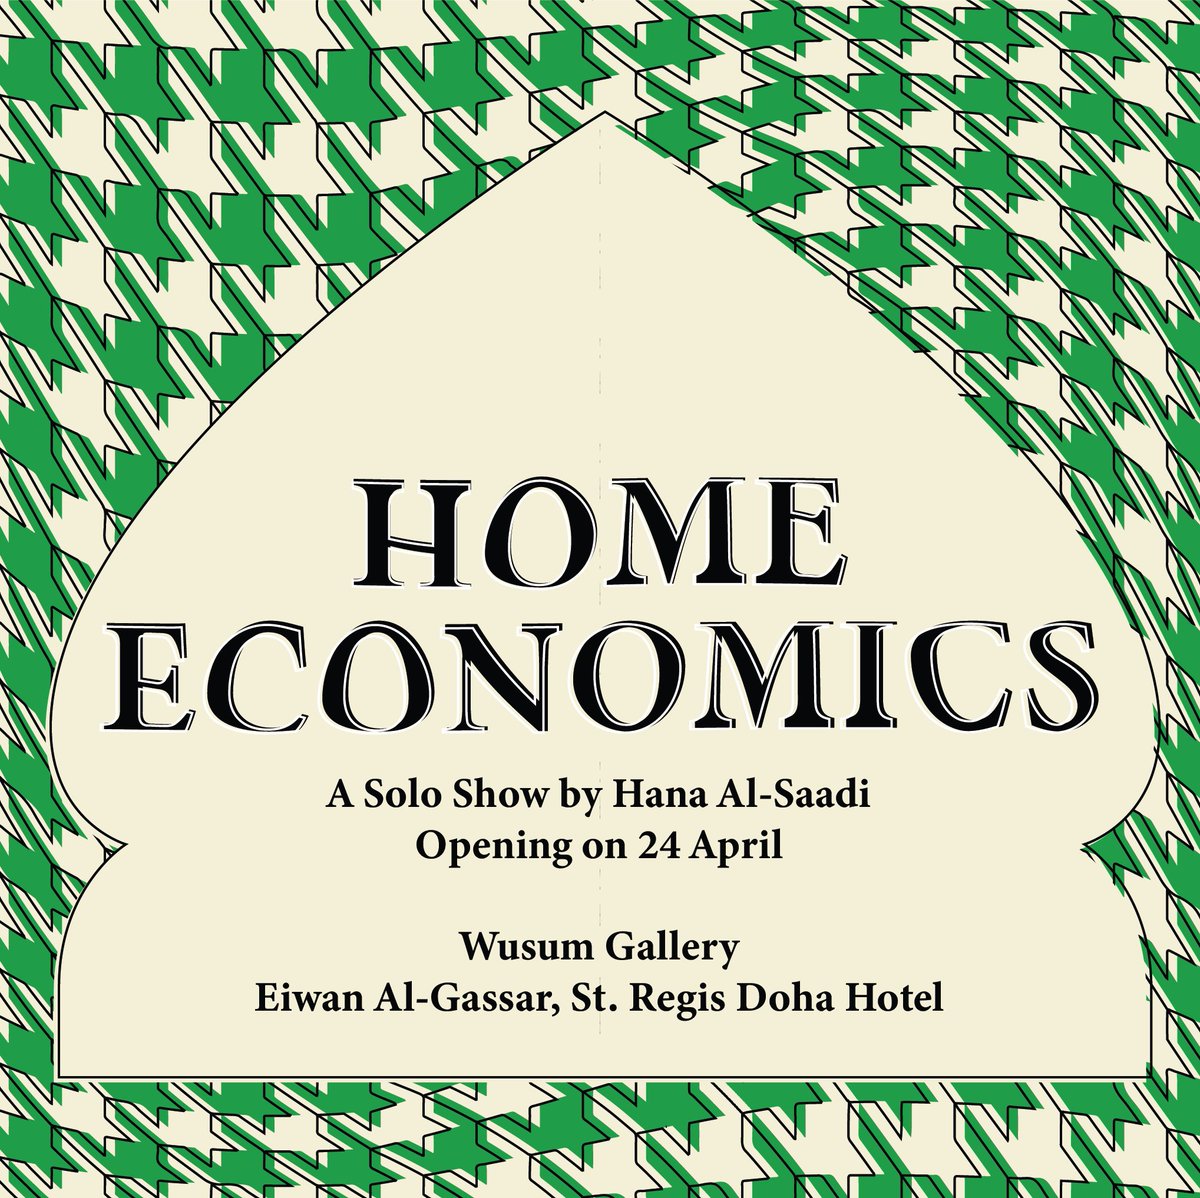 Painting + Printmaking alumna Hana Al-Saadi’s solo show 'Home Economics' will open on April 24, from 6-9pm at Wusum Gallery. The occasion marks the Gallery’s first solo exhibition & in this exhibition, Hana presents a new body of work spanning sculpture, painting, & installation.